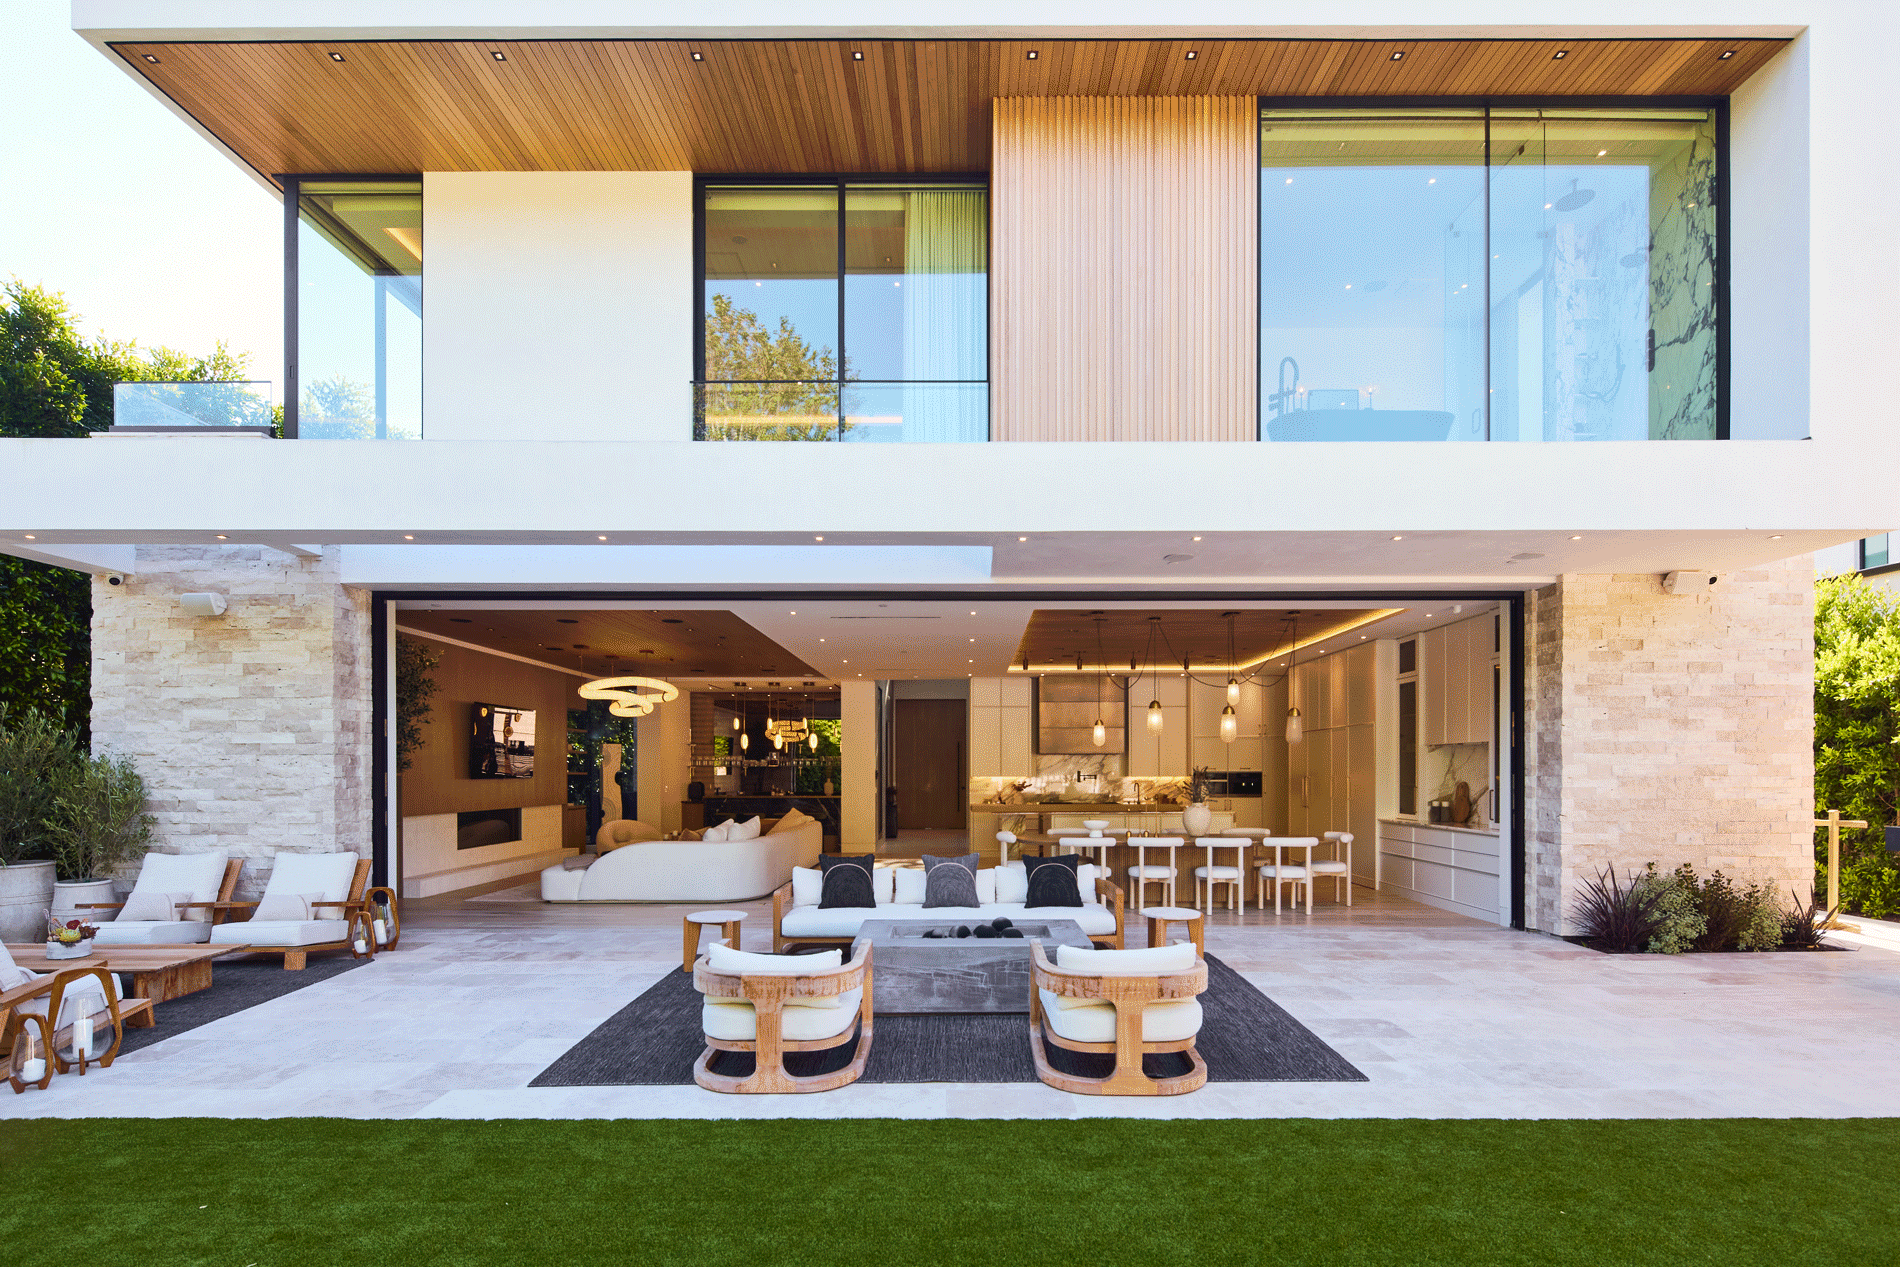 A large open living room with an outdoor patio.